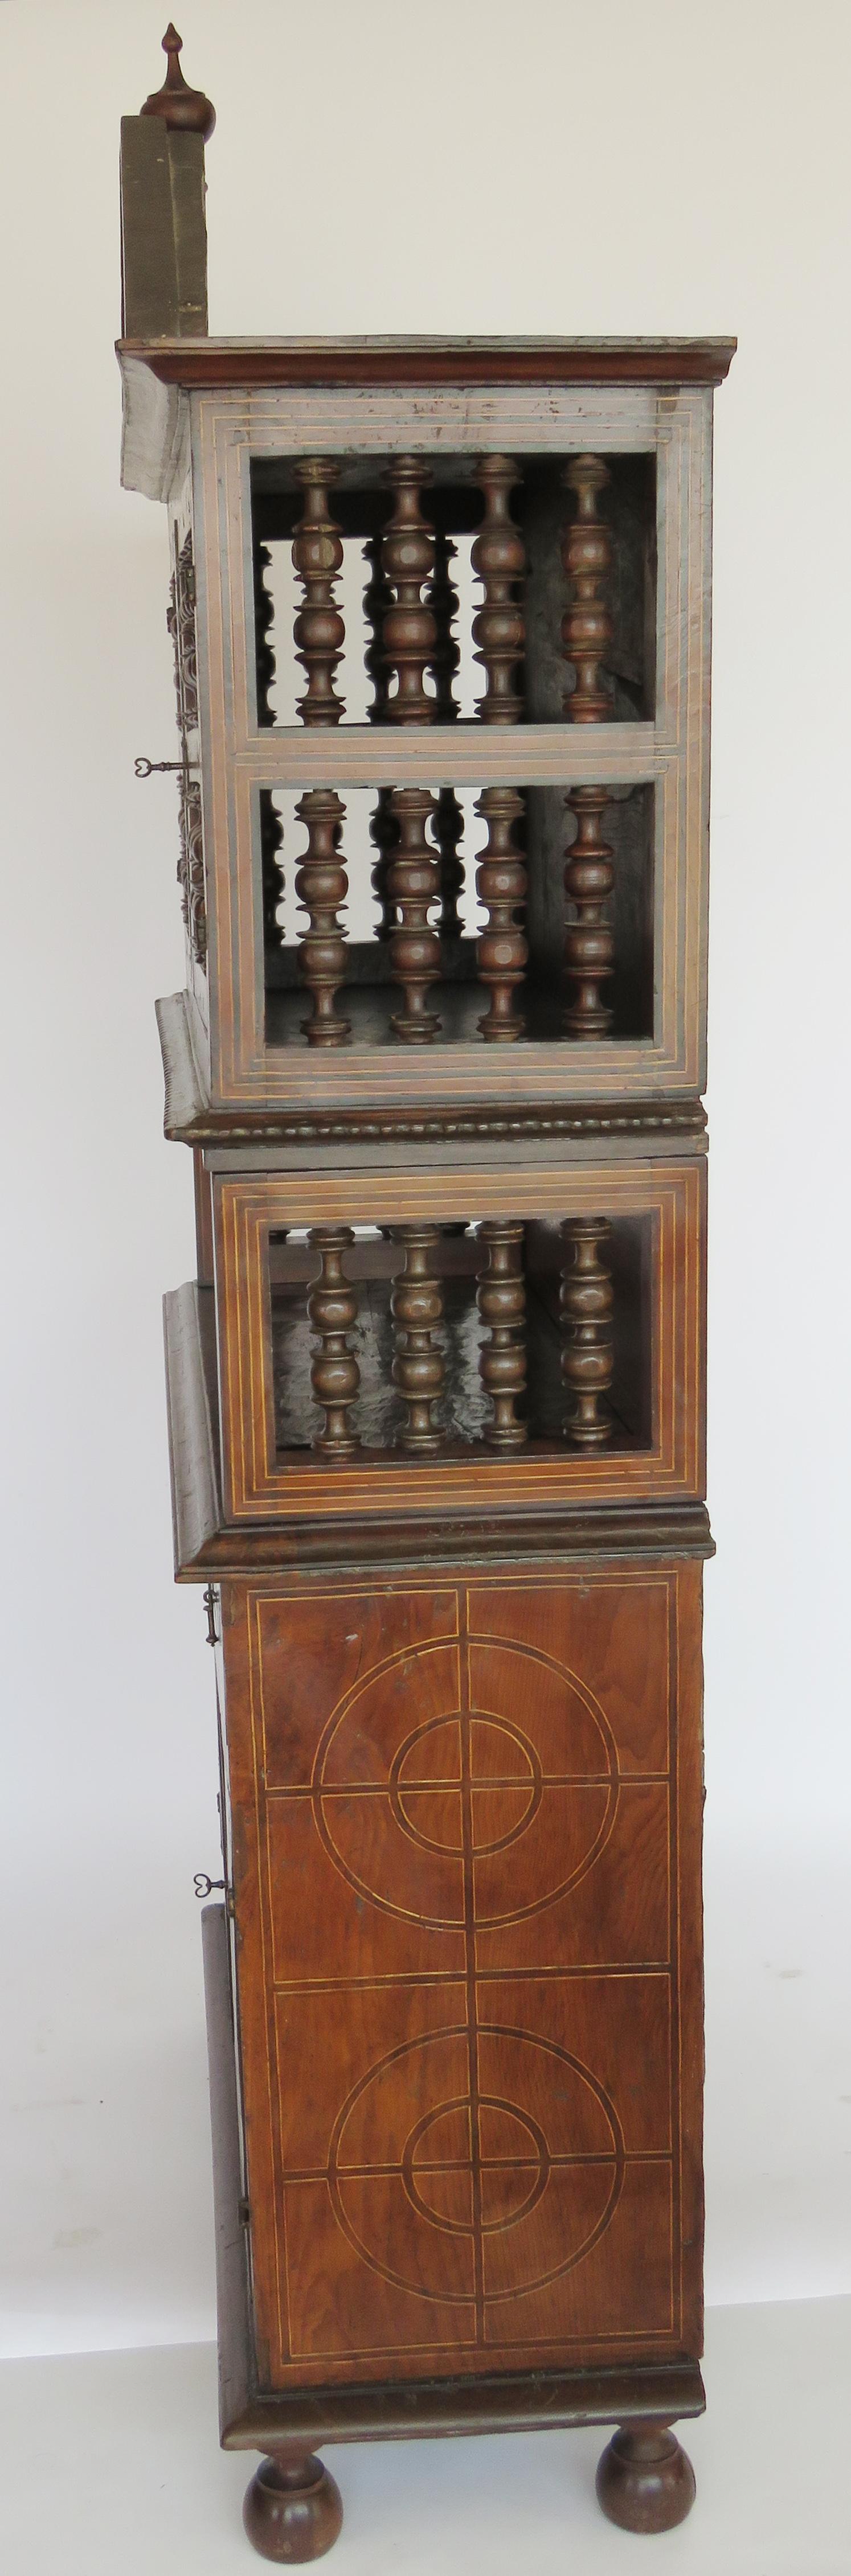 Spanish 18th Century Baroque Spindle Inlaid Walnut Cabinet For Sale